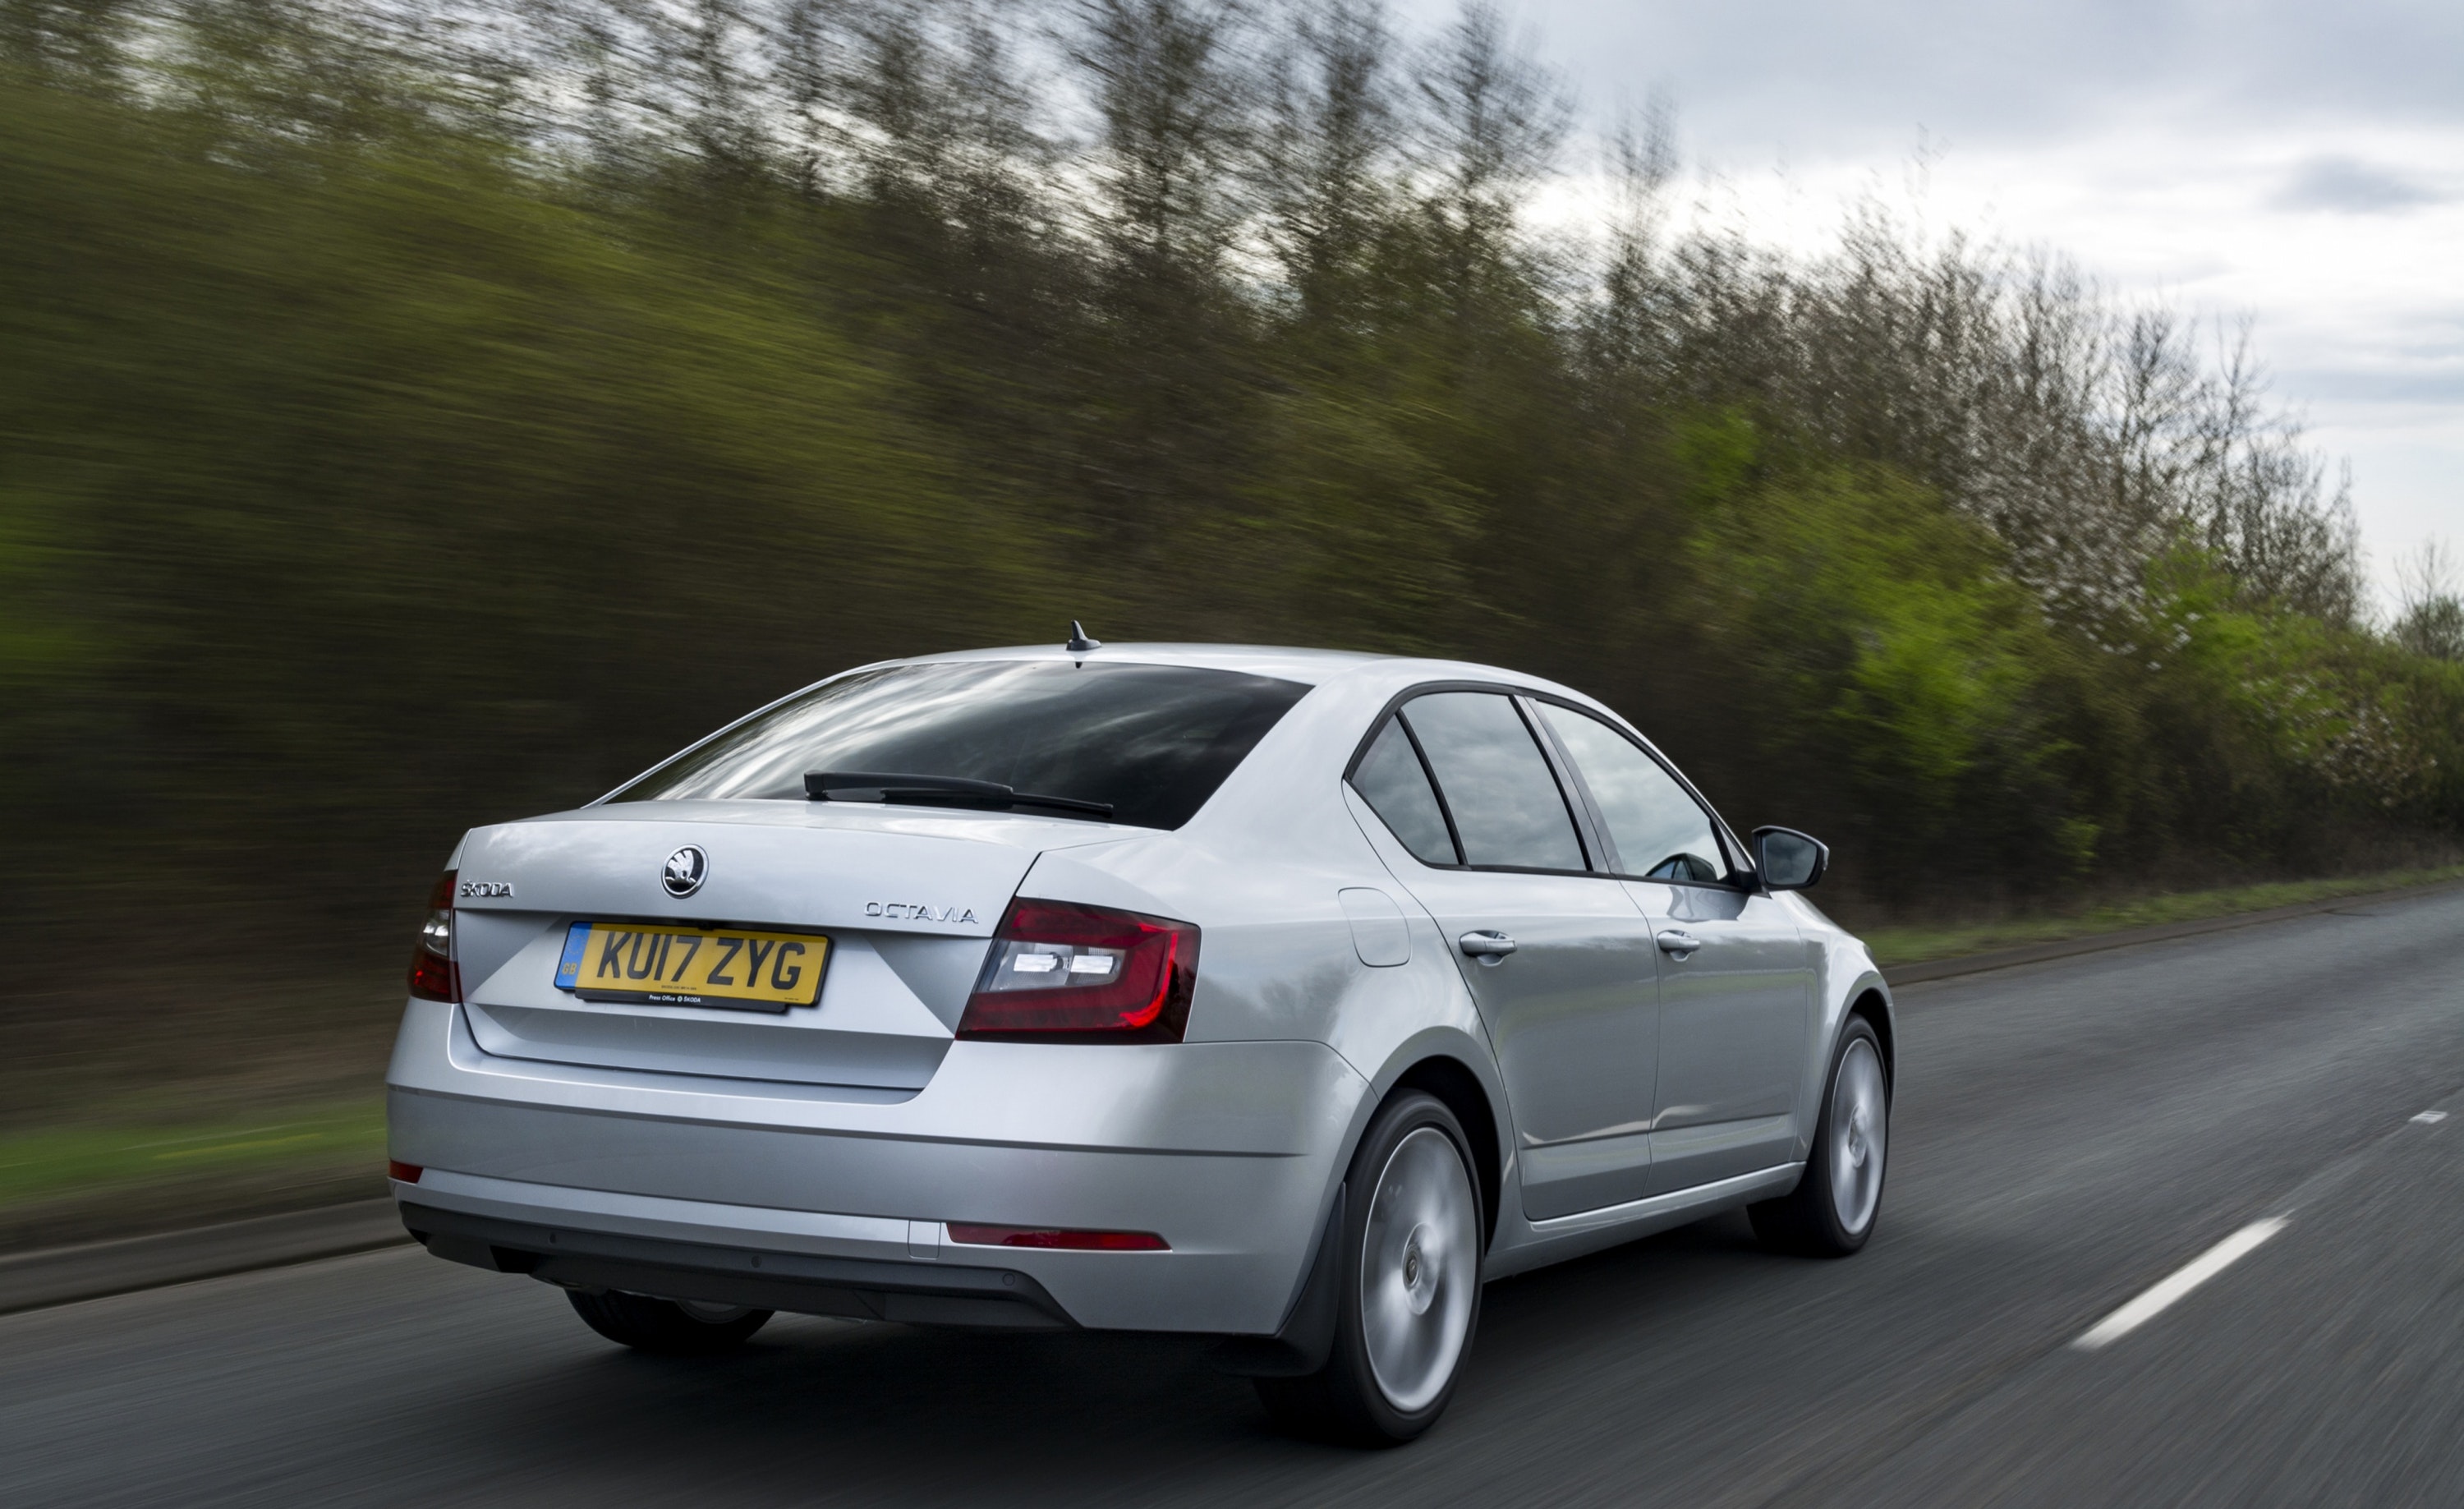 Silver Skoda Octavia driving away from you